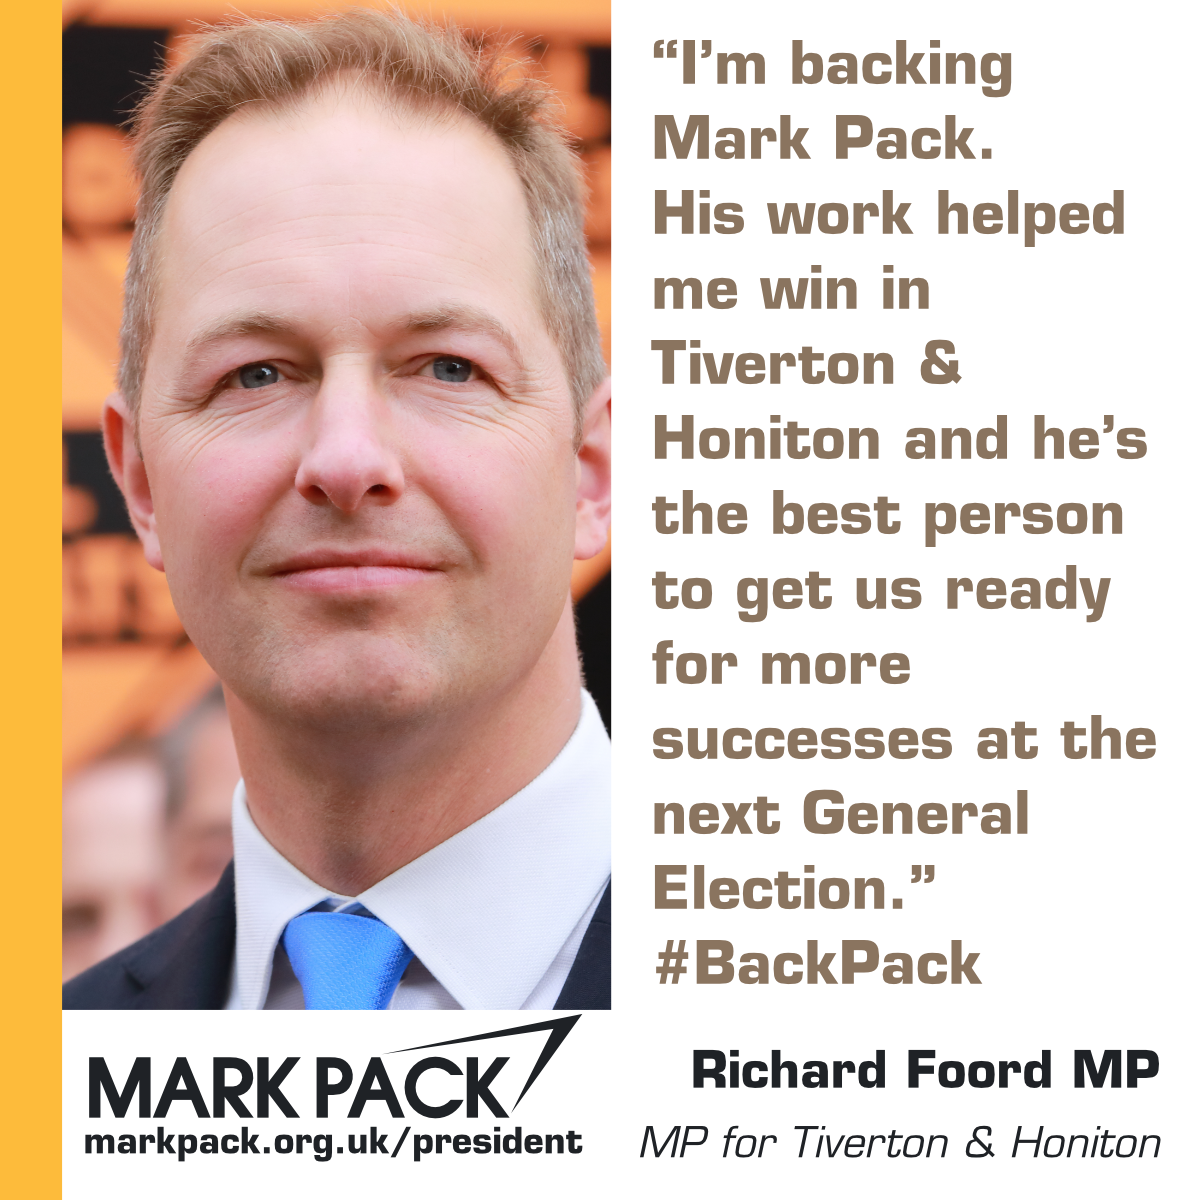 "We need a President who understands the role, the challenges facing rural communities, and can make us a well-oiled campaigning machine. That's why I'm backing Mark Pack. His worked helped me win in Tiverton & Honiton" - Richard Foord MP